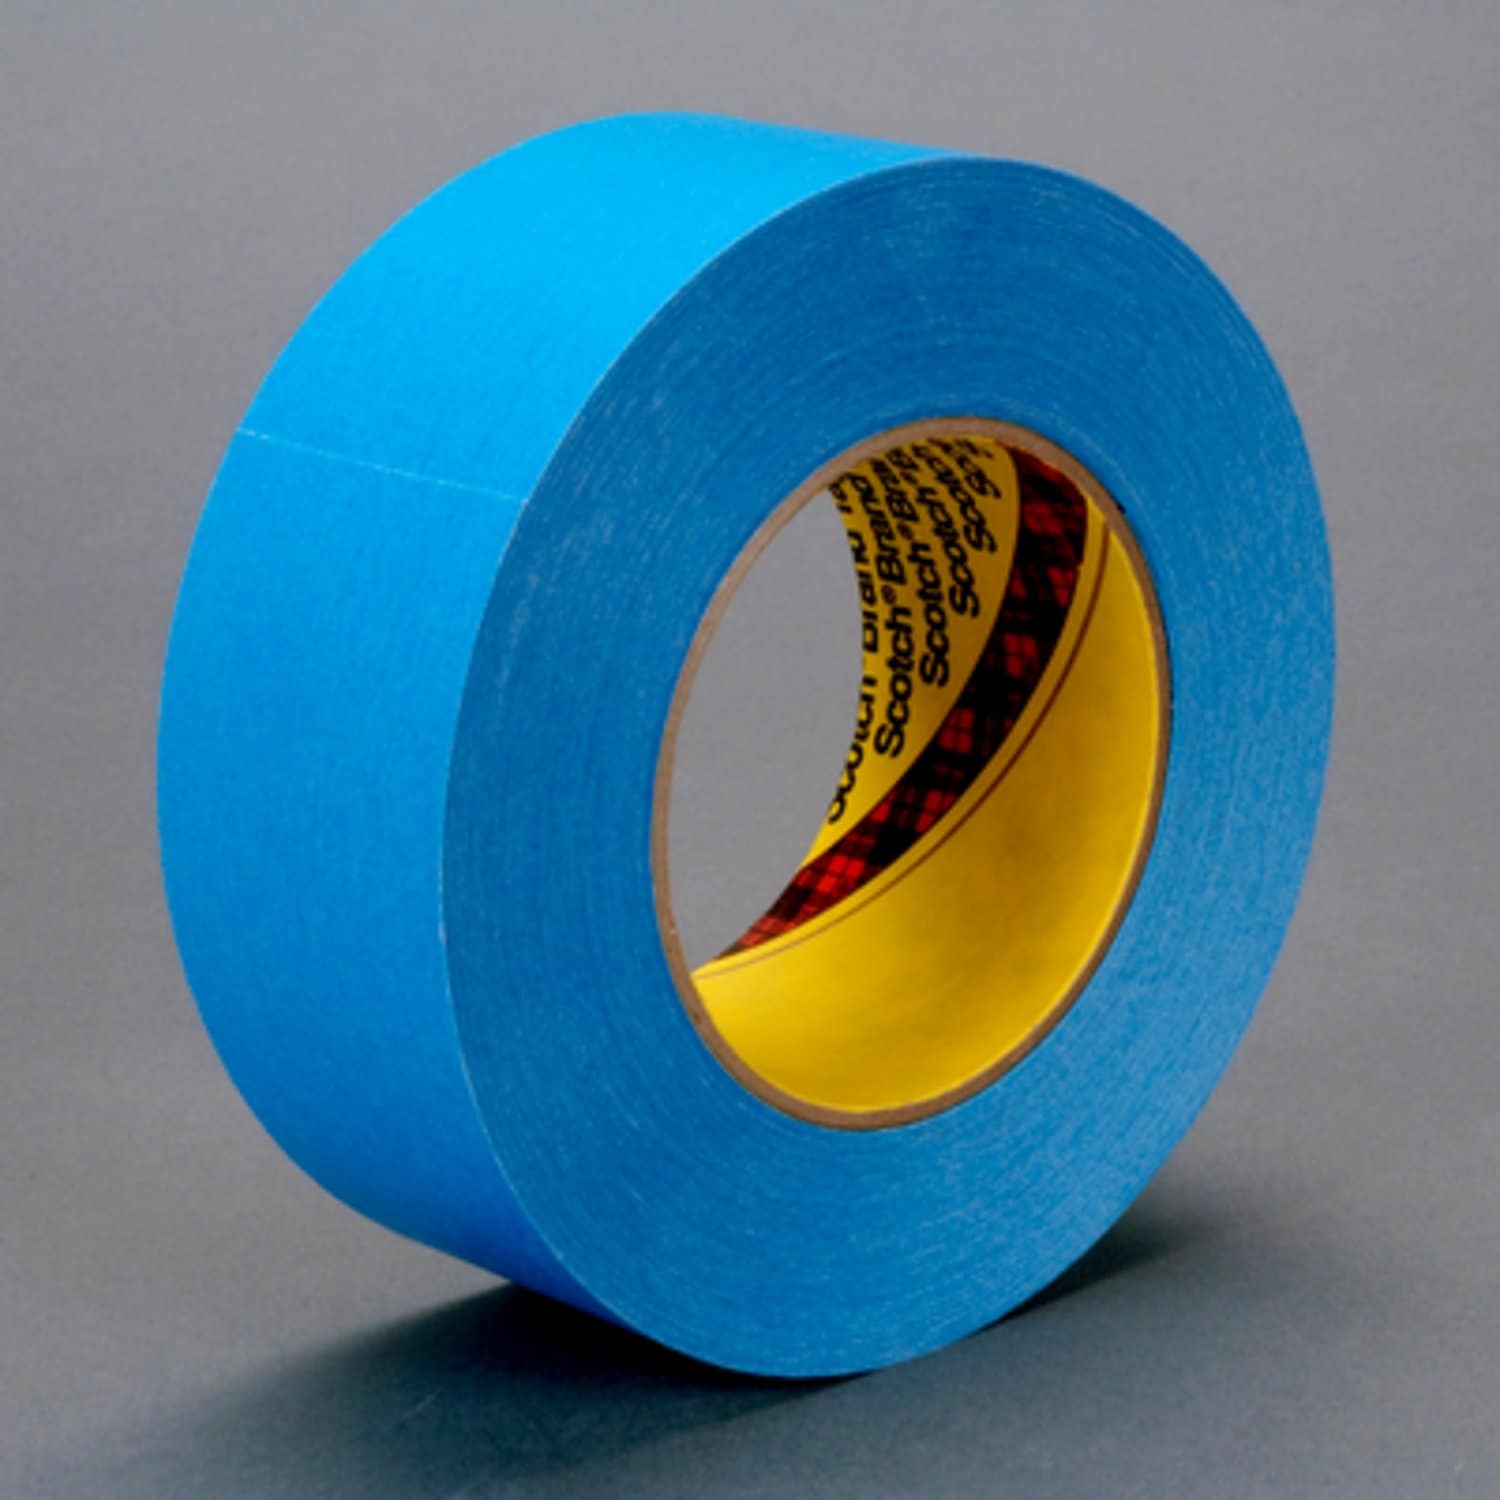 7100028018 - 3M Repulpable Strong Single Coated Tape R3187, Blue, 24 mm x 55 m, 7.5
mil, 36 rolls per case